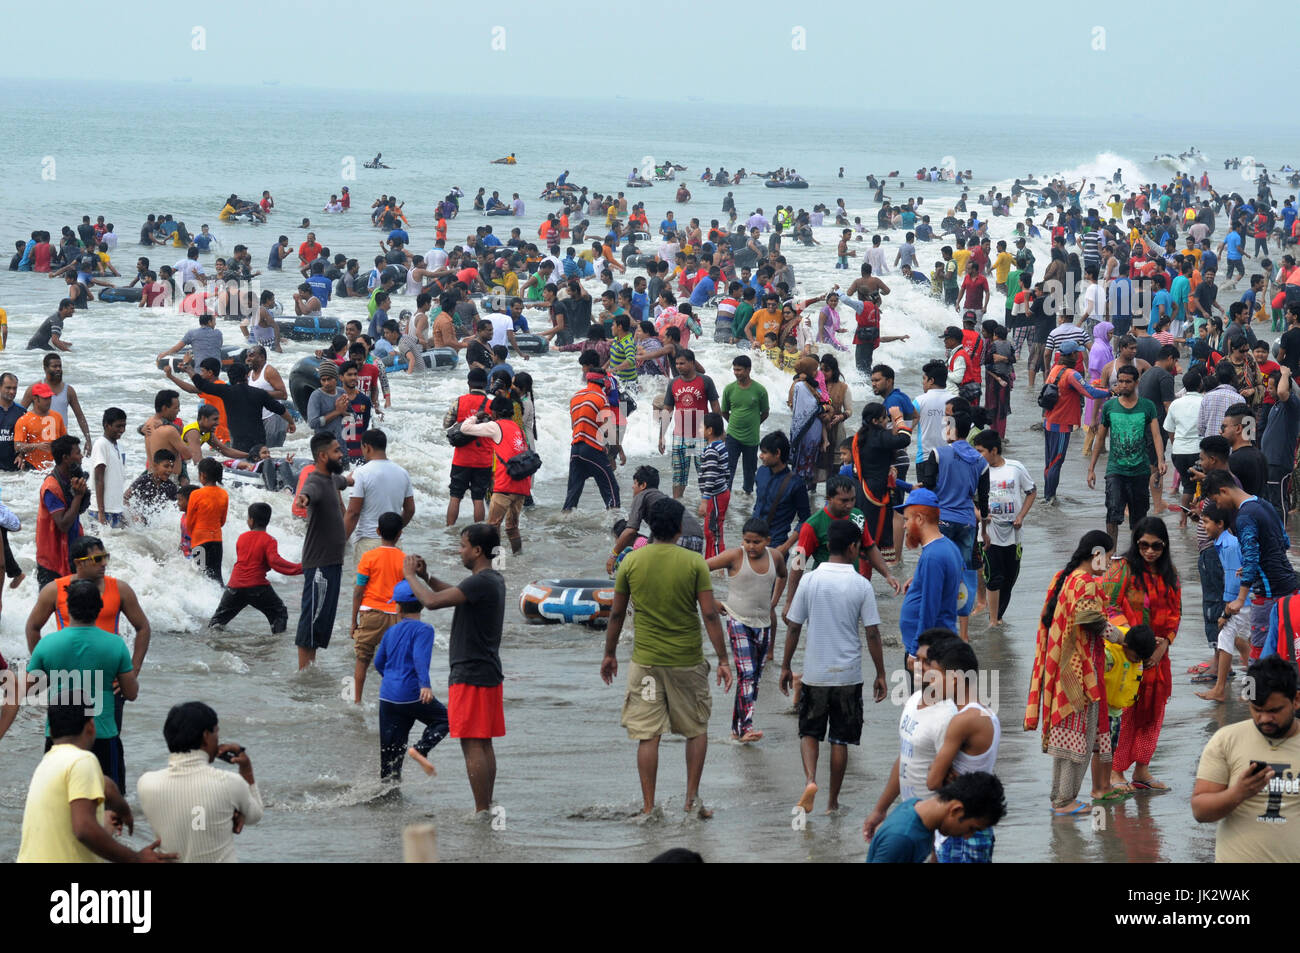 Thousands of people gathered at Cox’s Bazar sea beach to pass their vacation. The beach in Cox's Bazar is an unbroken 120 km (75 mi) sandy sea beach w Stock Photo